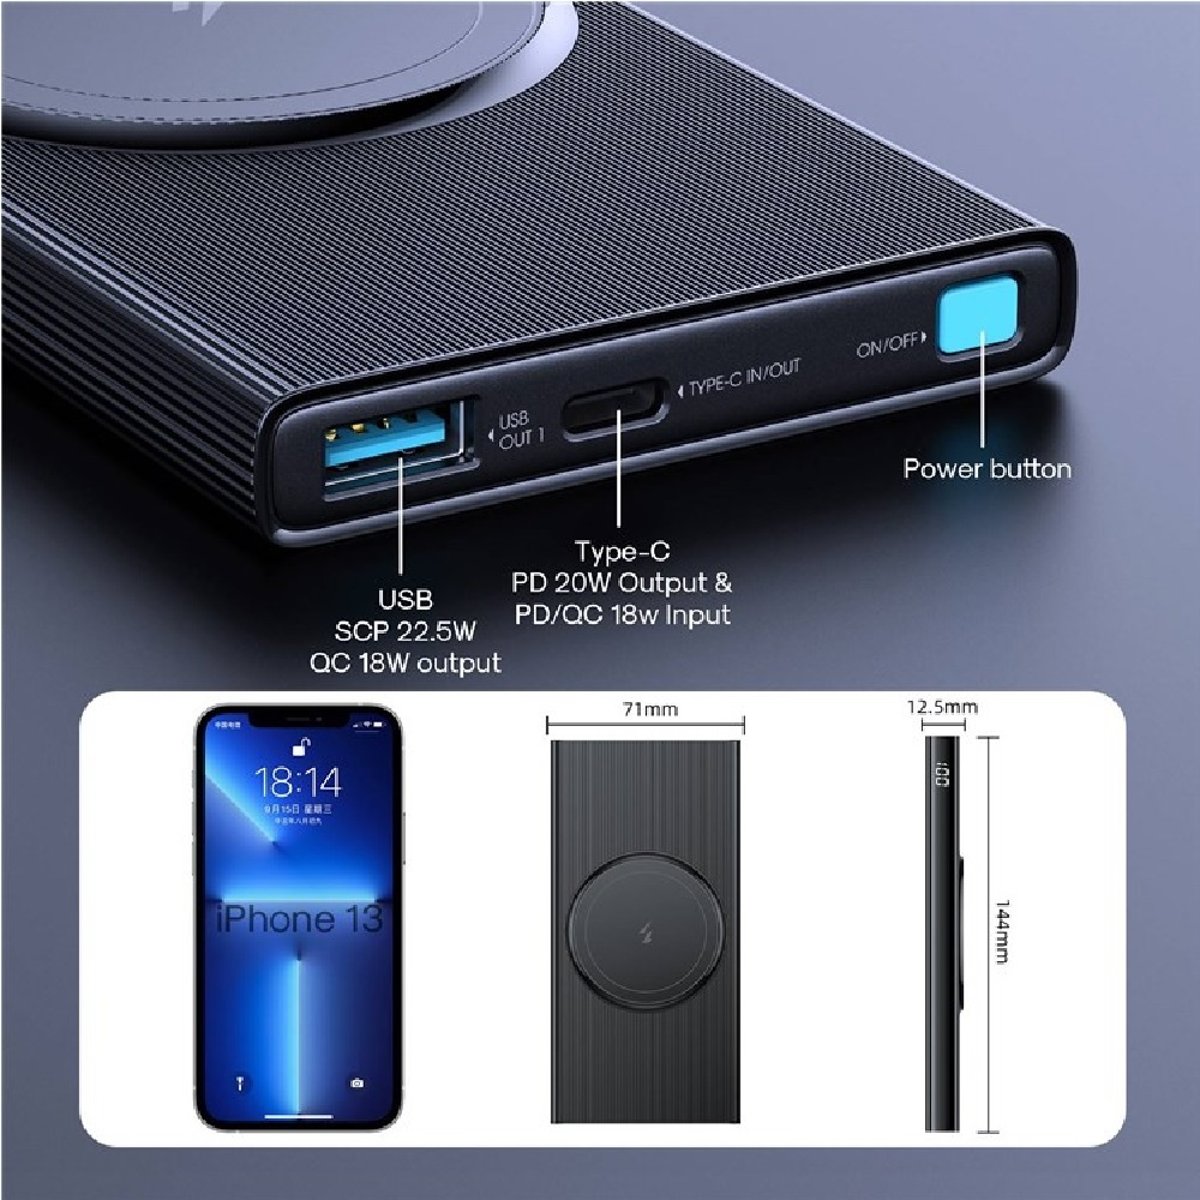 JOYROOM JR-W010 22.5W Magnetic Wireless Charging Power Bank Ultra Thin 10000mAh Battery Charger with Digital Display